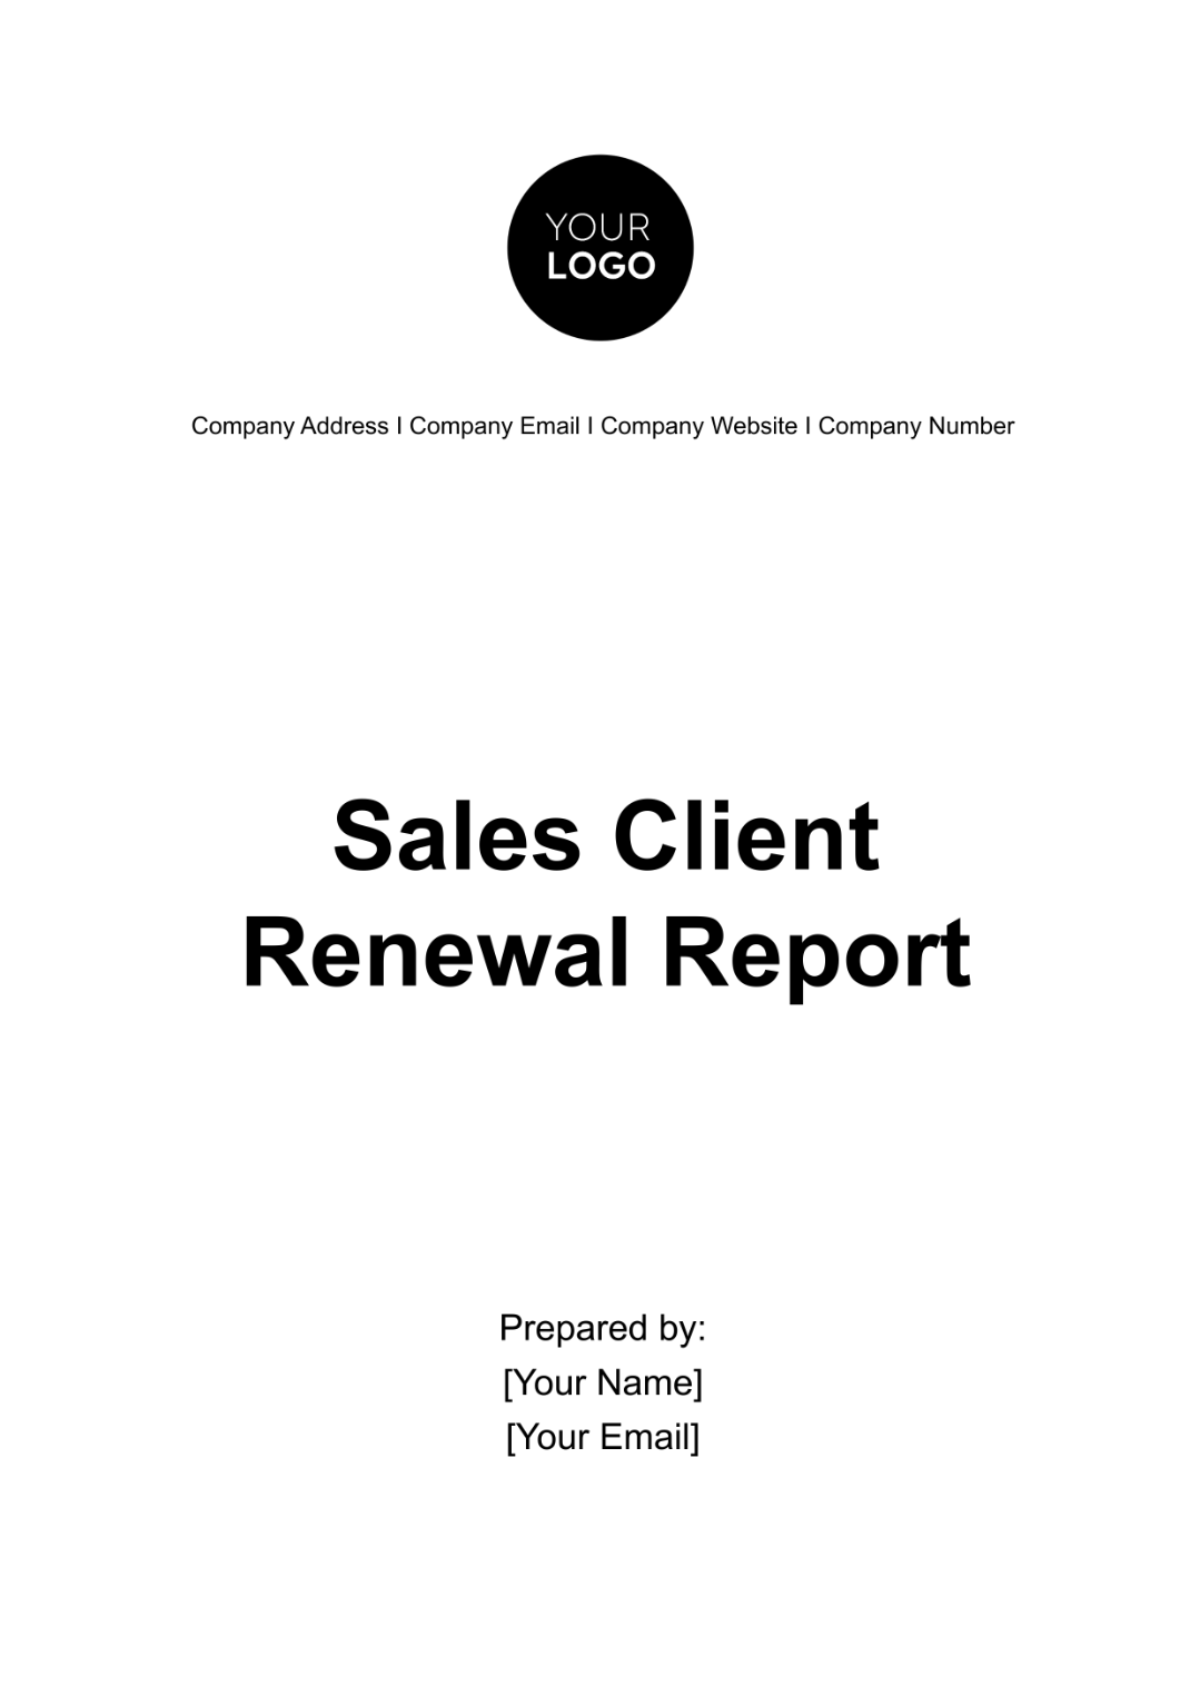 Sales Client Renewal Report Template